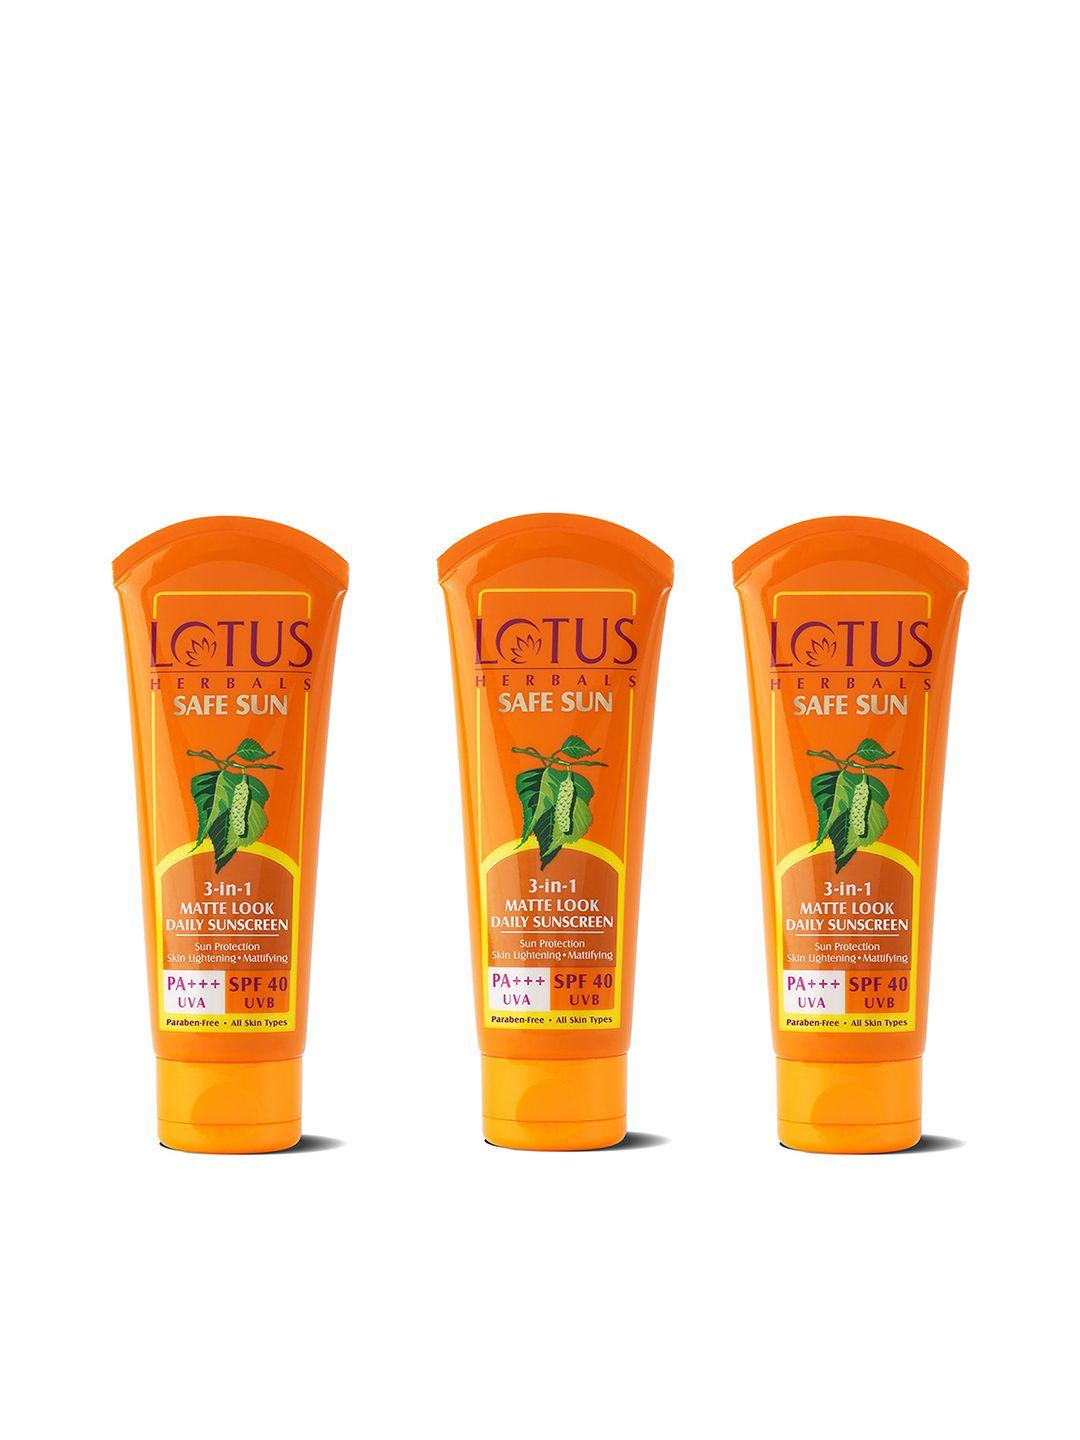 lotus-herbals-set-of-3-safe-sun-3-in-1-matte-look-spf-40-pa+++-daily-sunscreen---50g-each